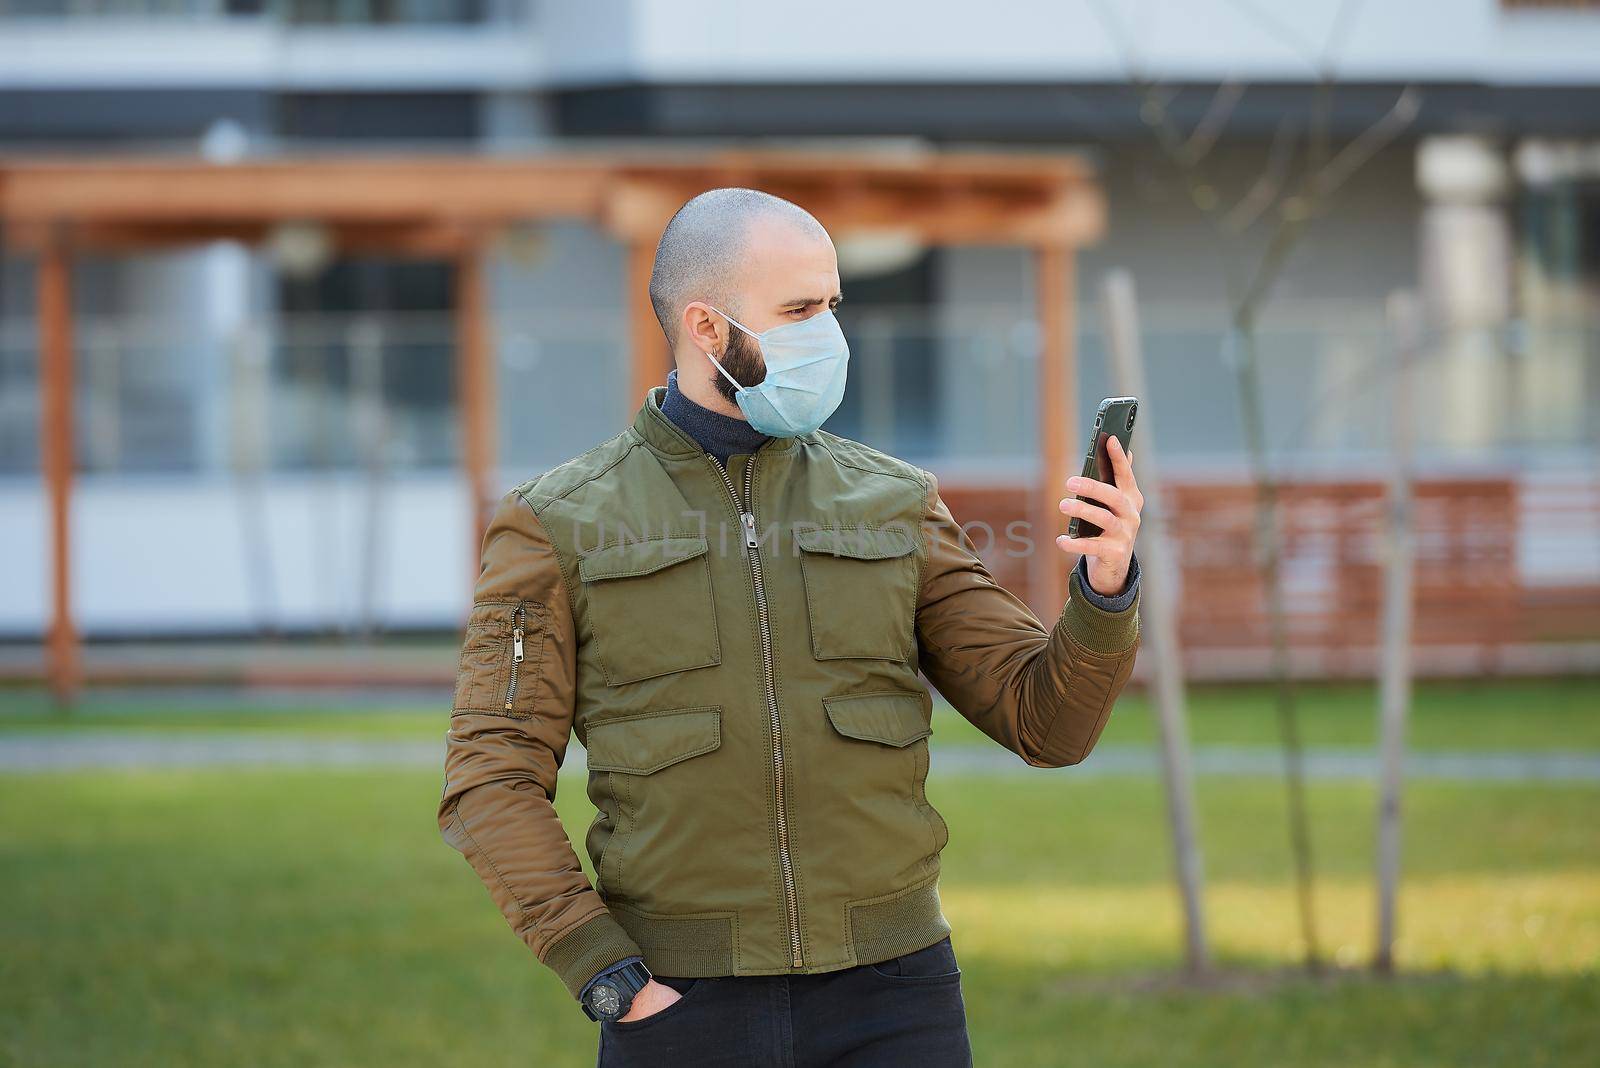 A bald man in a medical face mask to avoid the spread coronavirus checking his smartphone in the cozy street. A guy with a beard standing turned right wears a face mask against COVID 19.